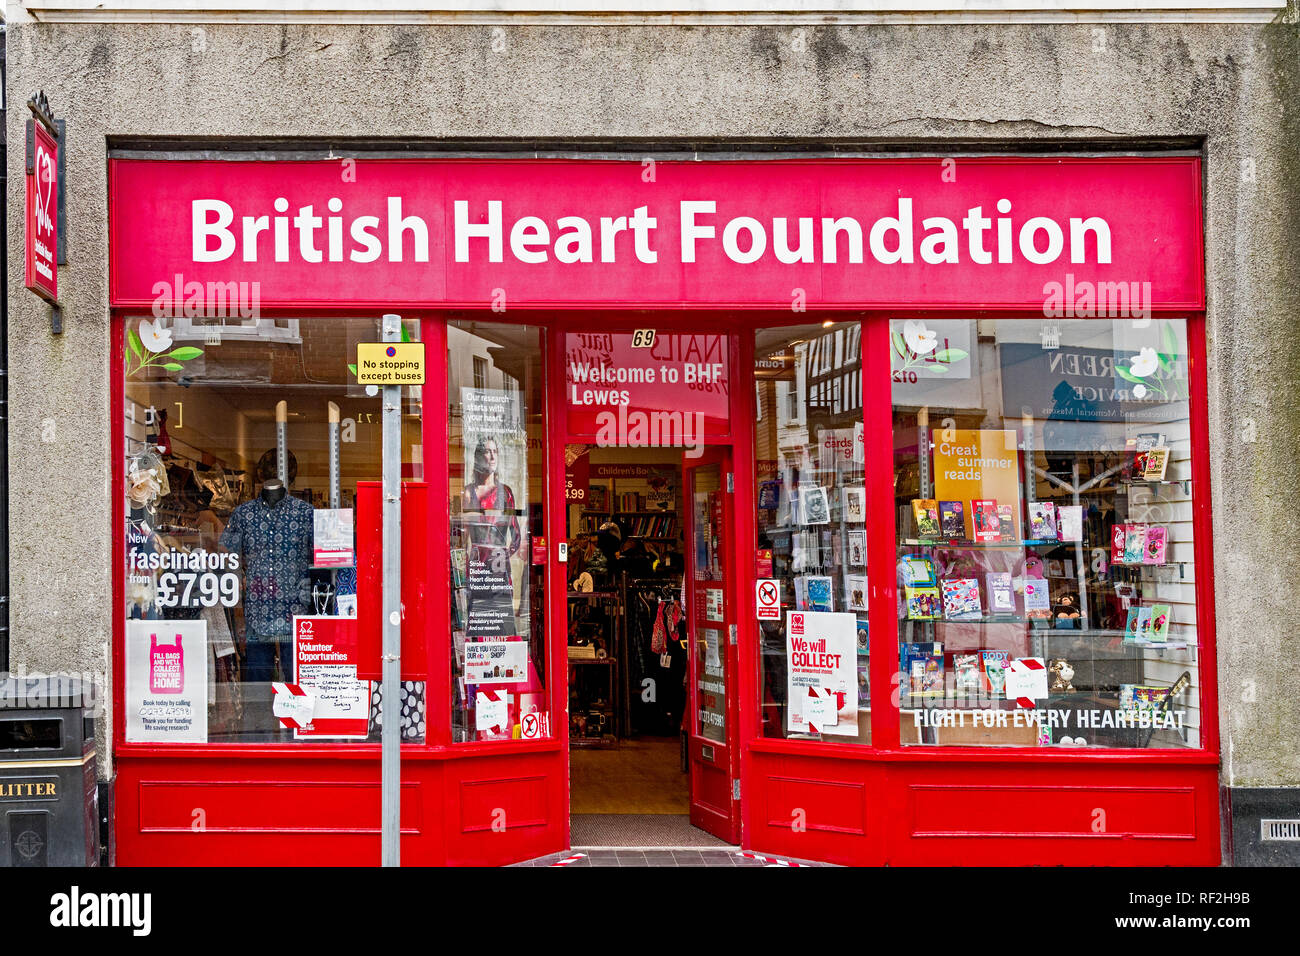 The British Heart Foundation charity shop in Lewes (East Sussex) Stock Photo